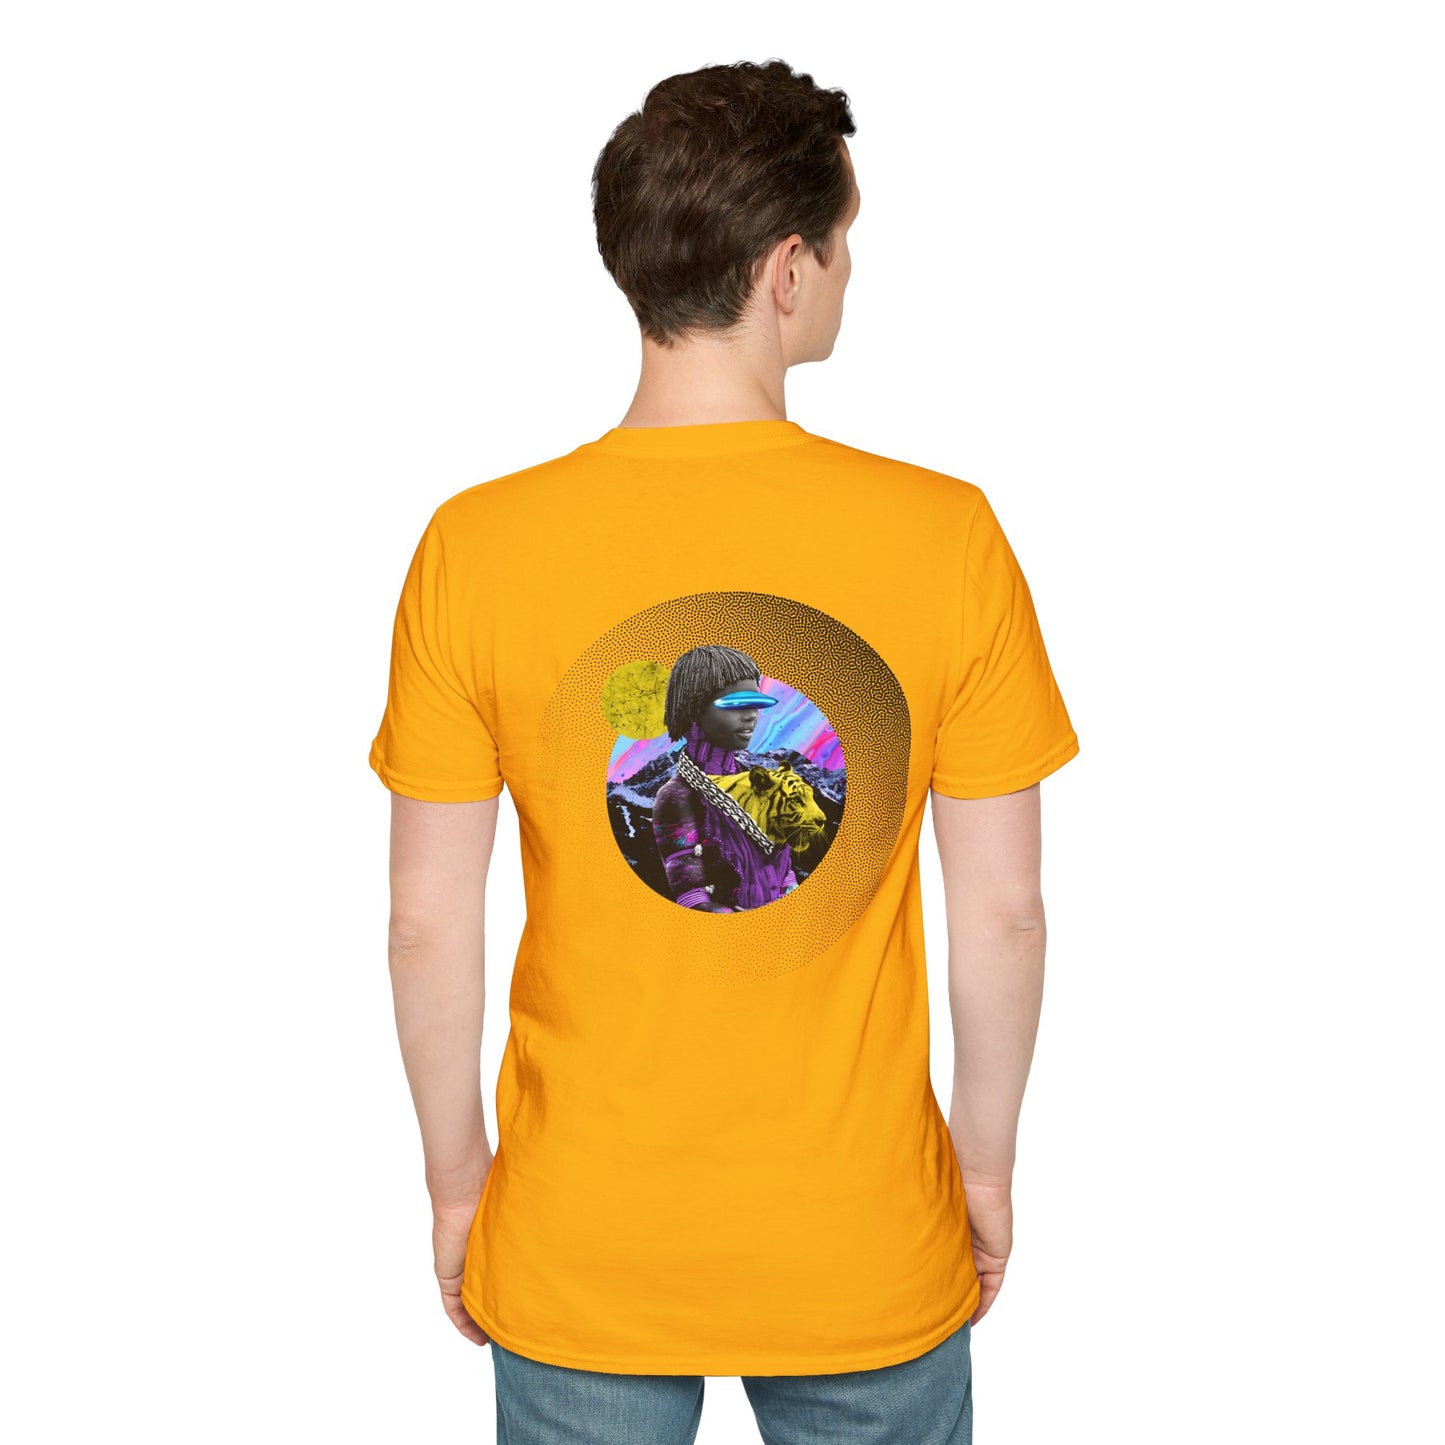 Yellow T-shirt with a collage of an African woman with futuristic glasses and a yellow tiger